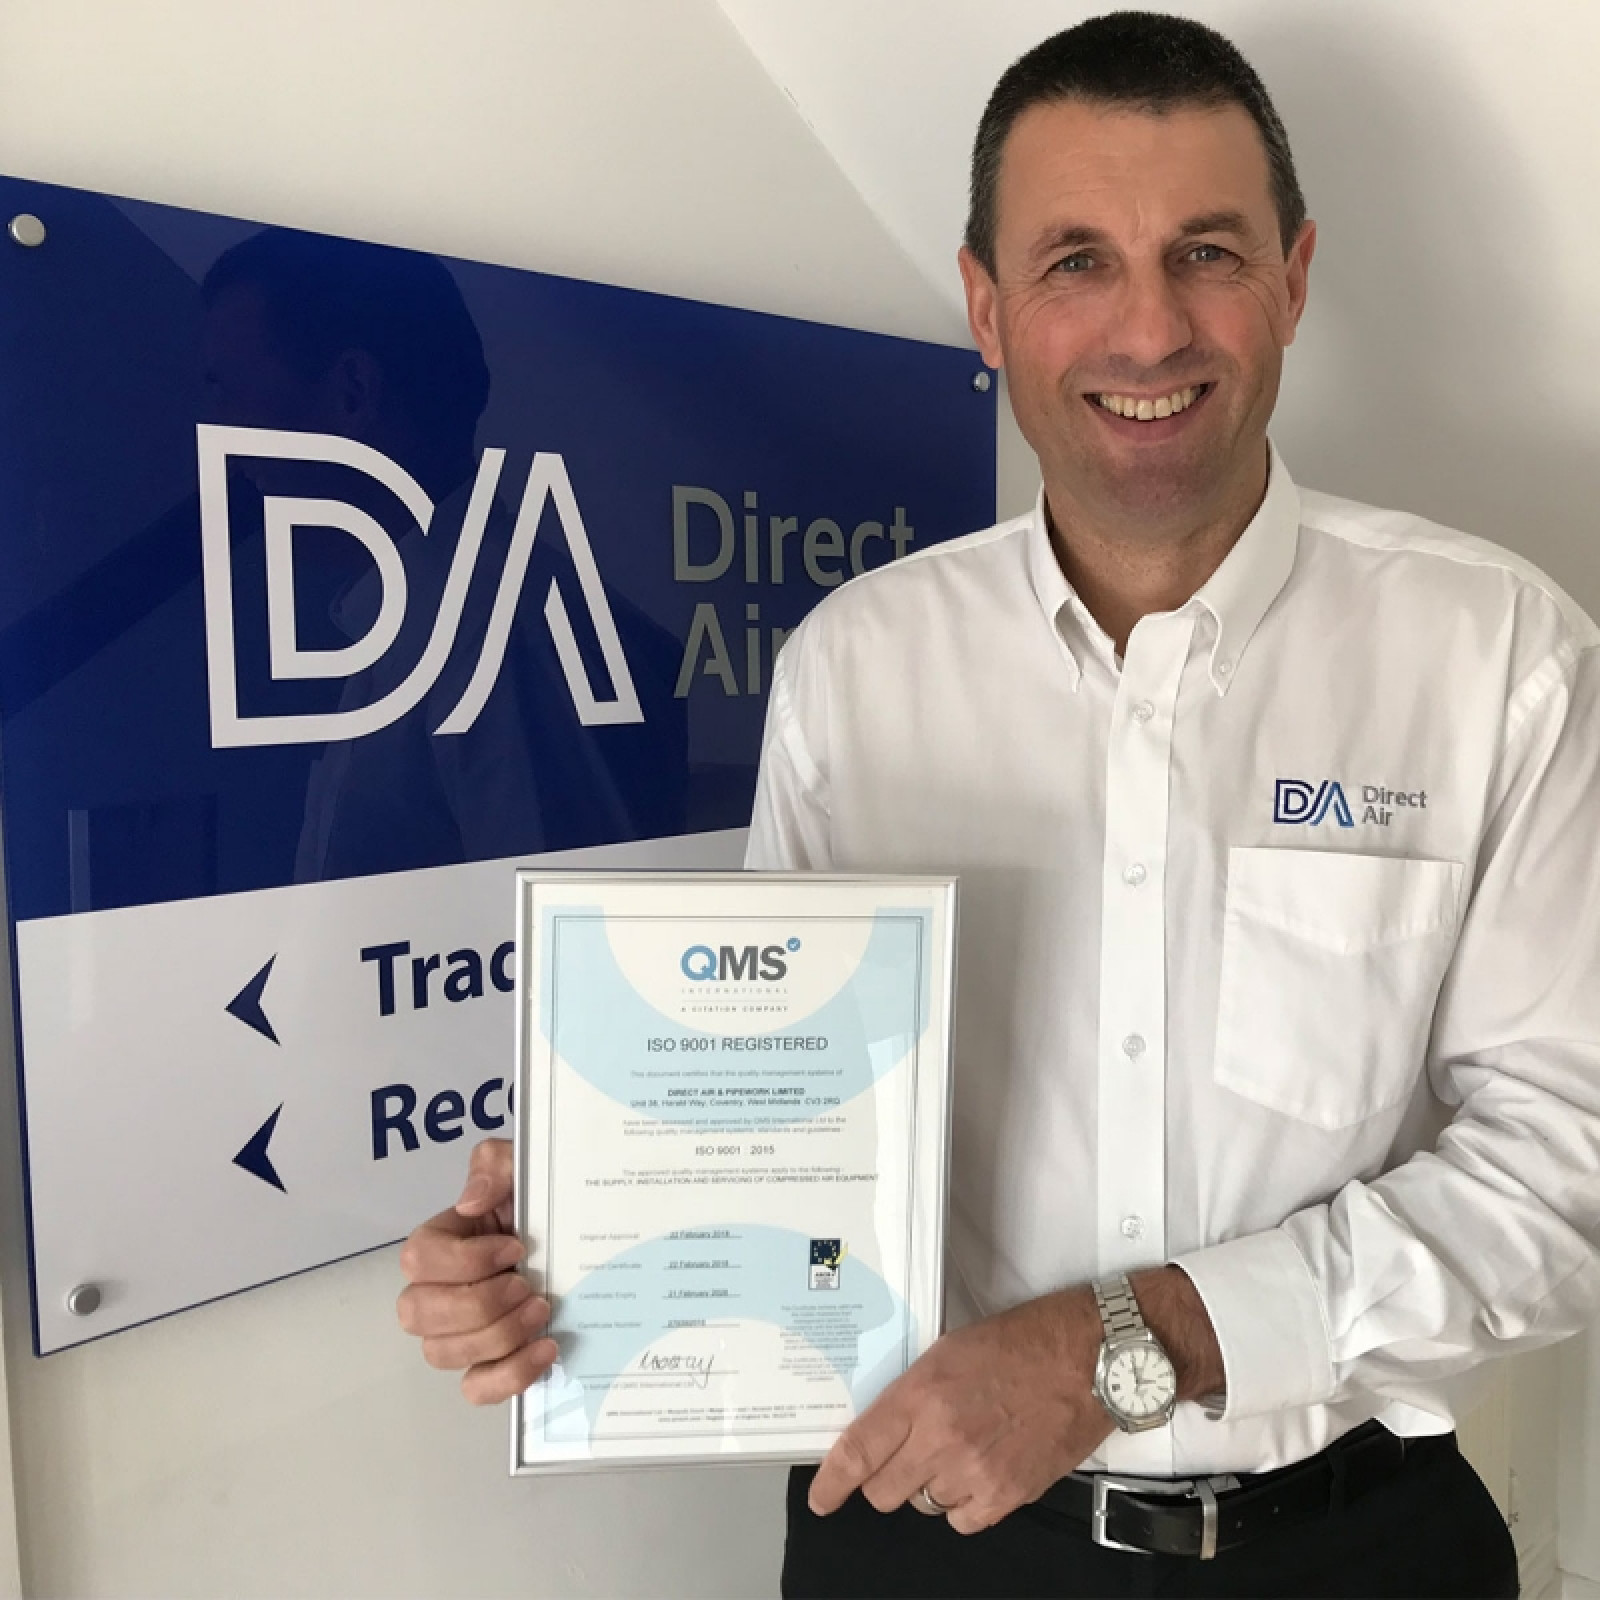 Direct Air gains ISO 9001 certification